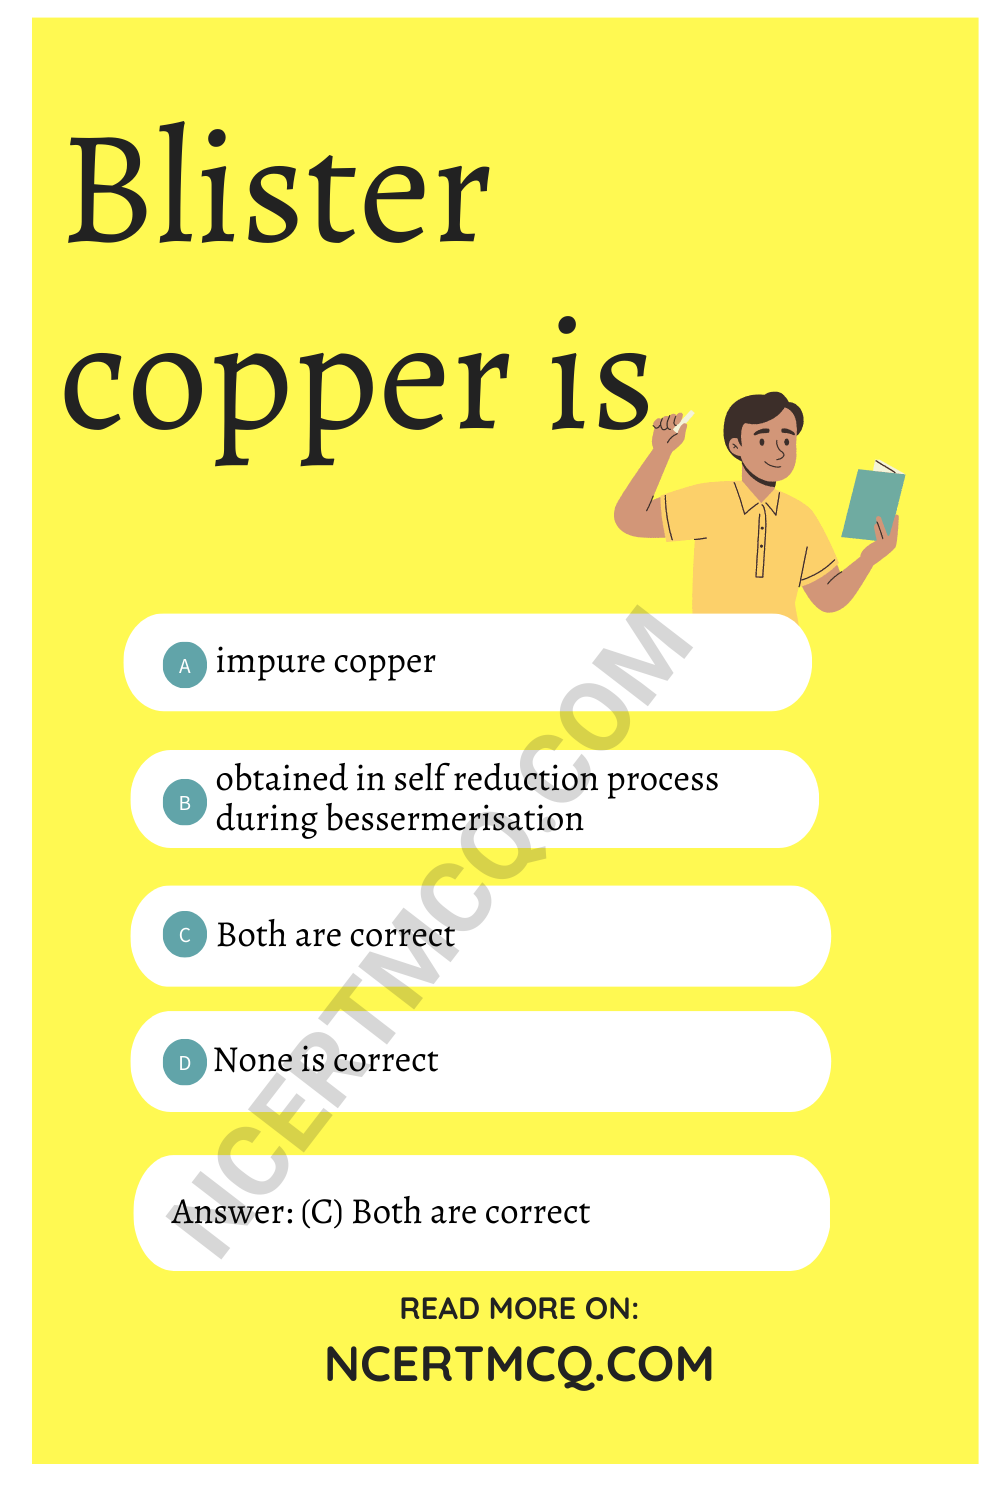 Blister copper is